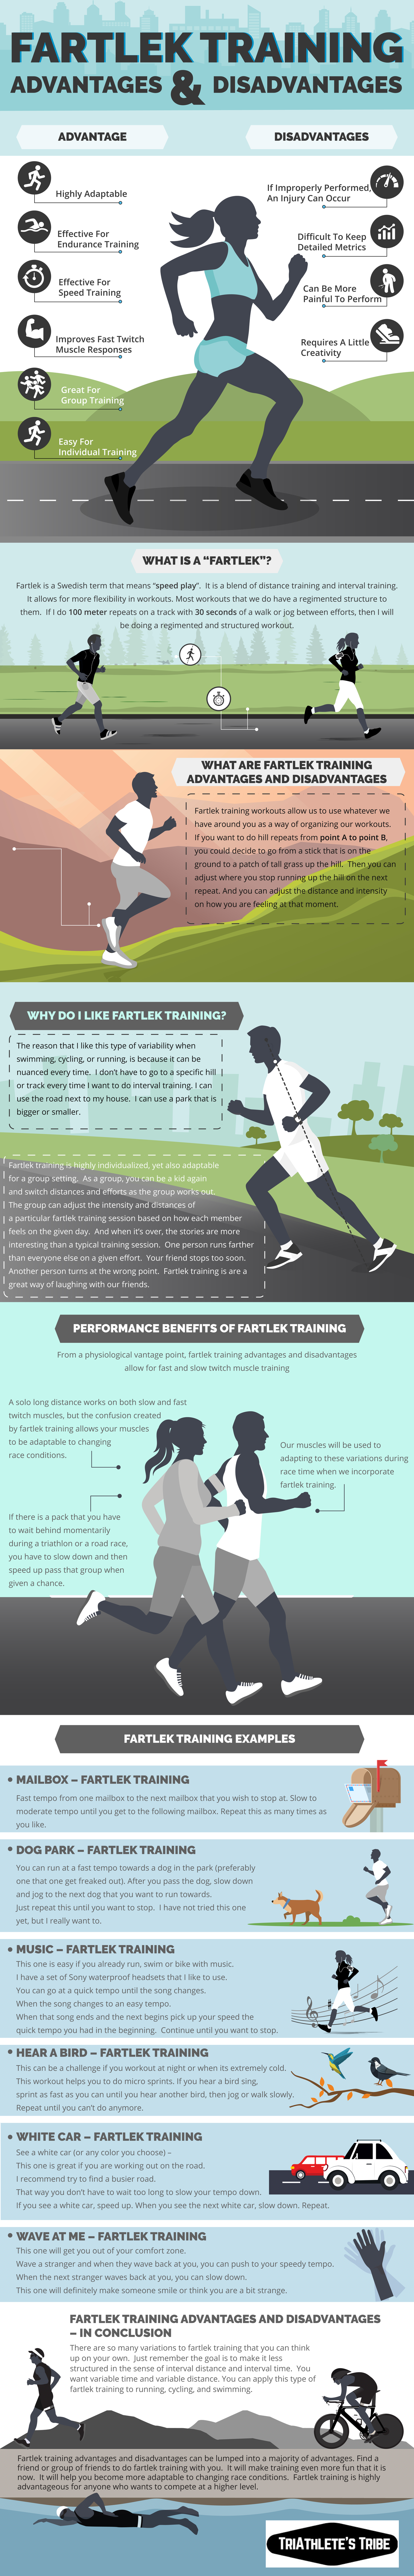 Fartlek Training Advantages and Disadvantages Infographic